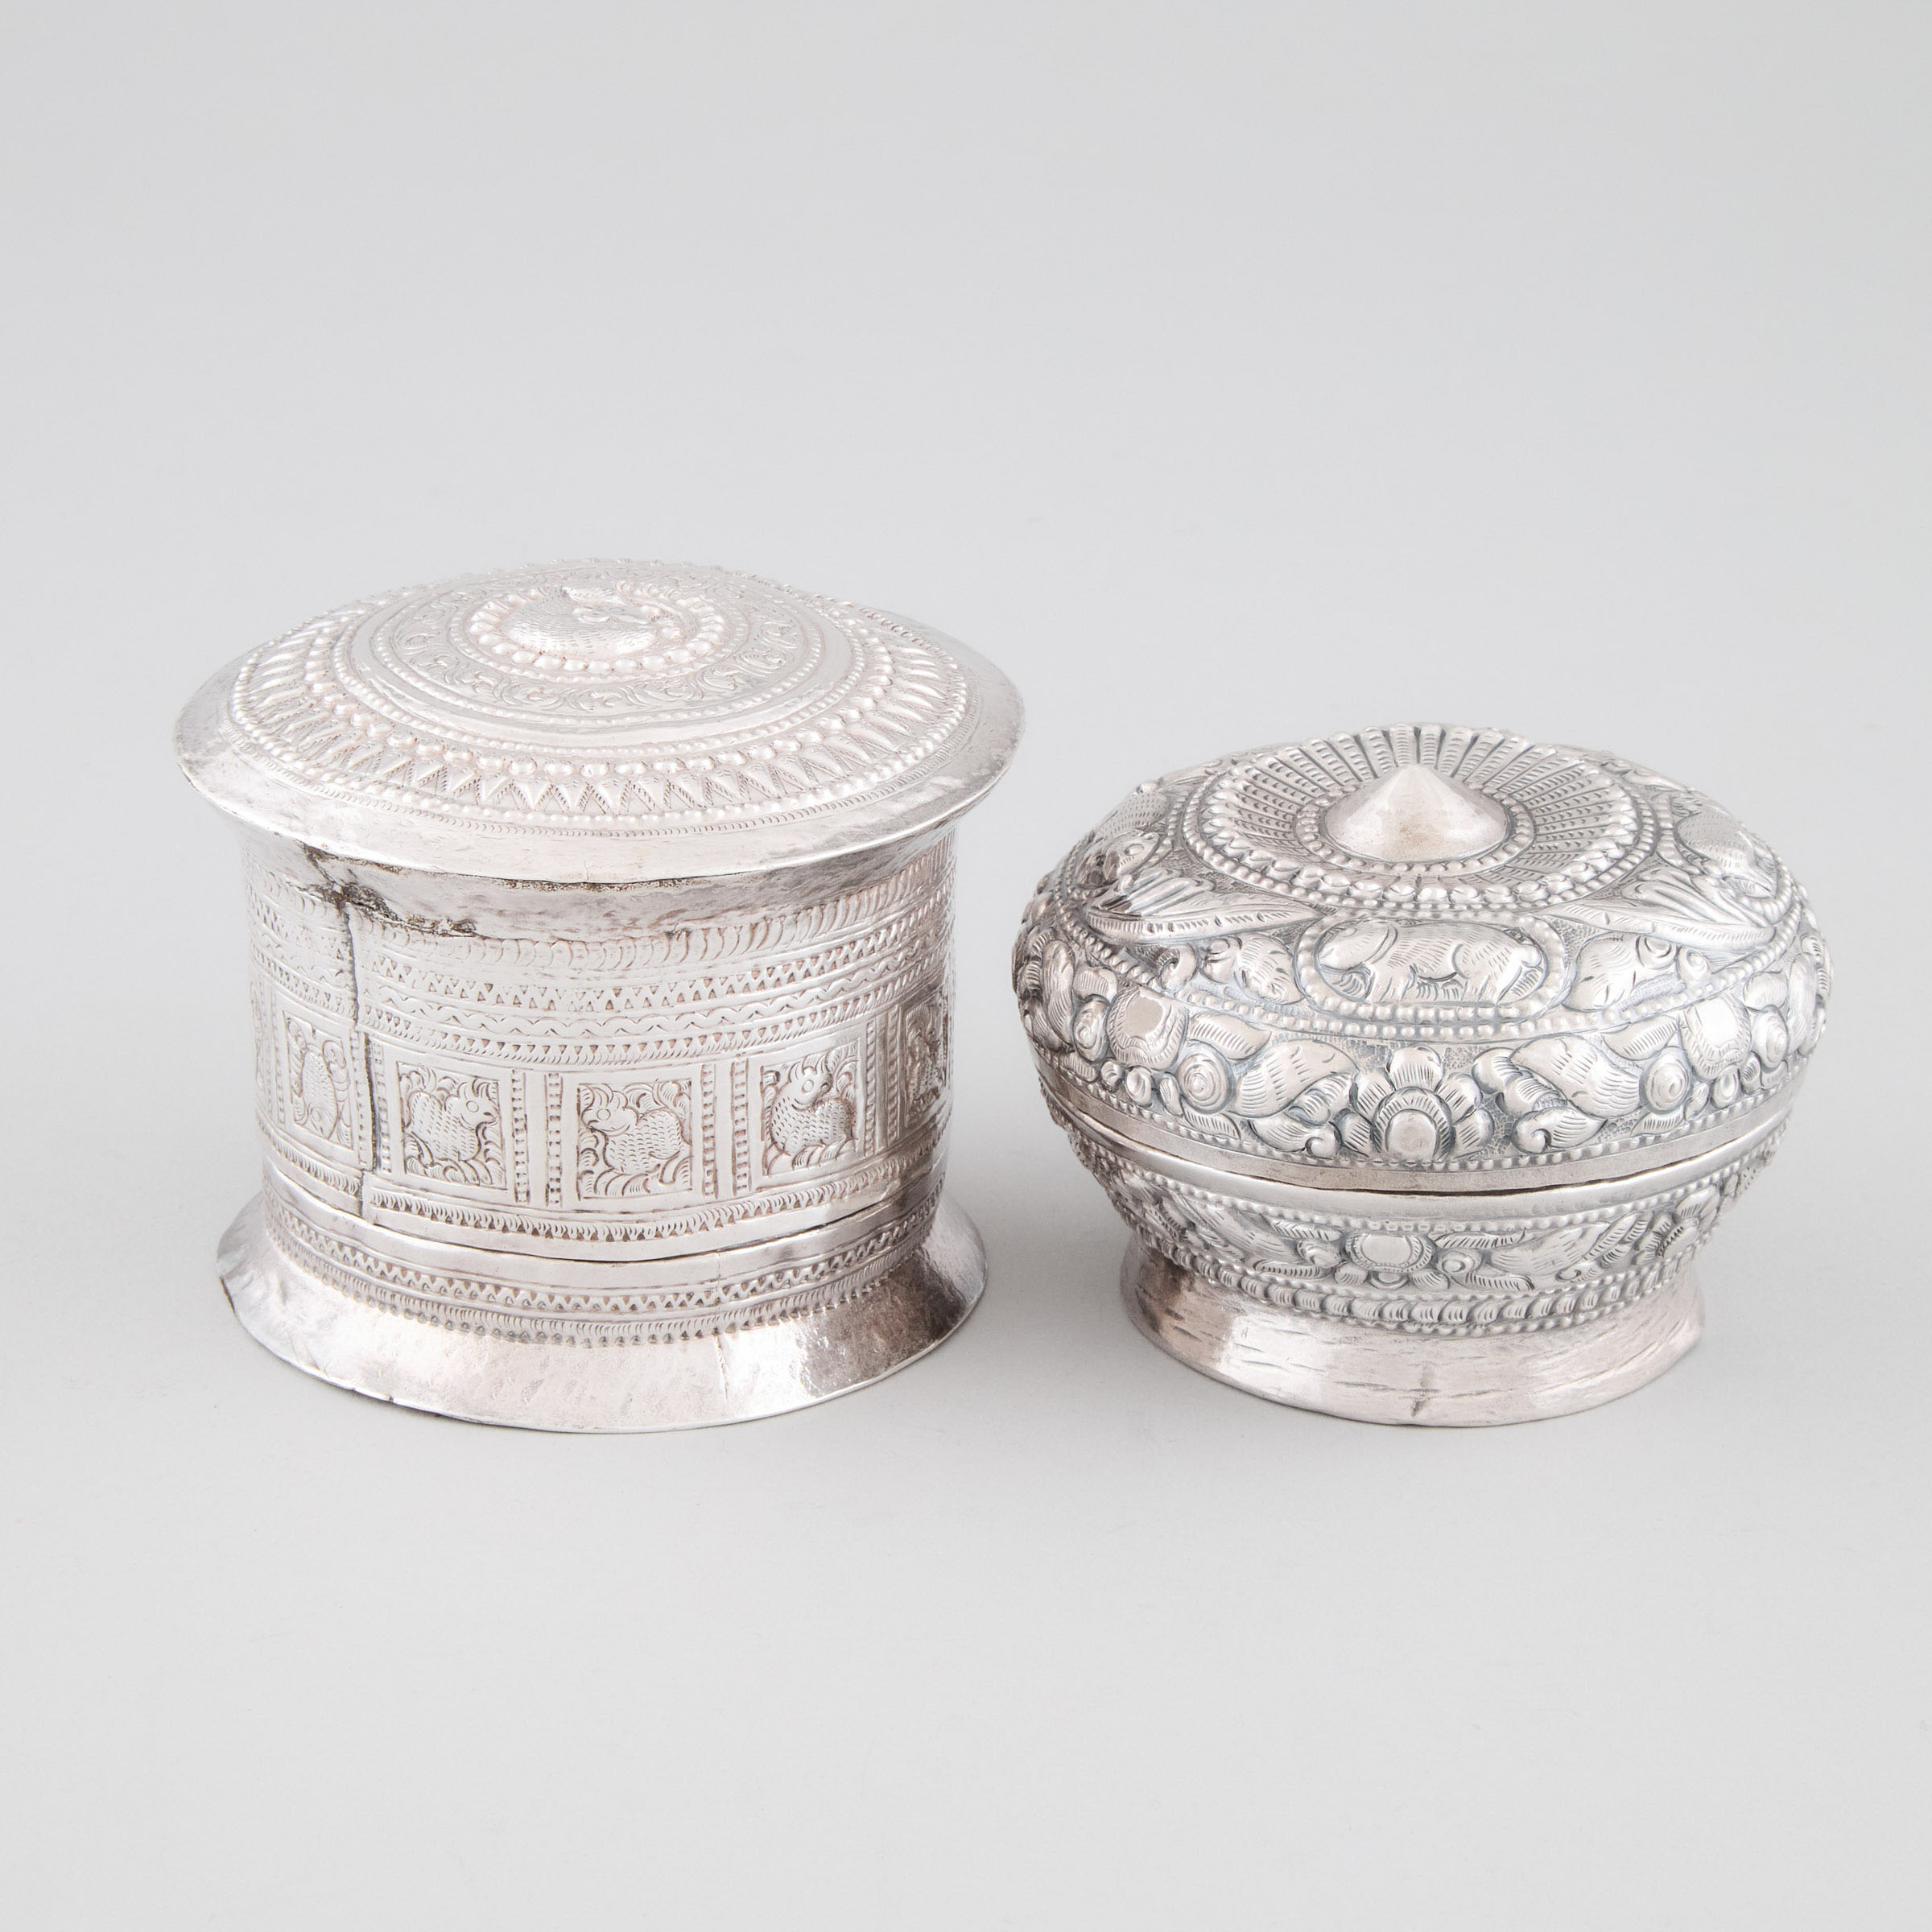 Two Southeast Asian Silver Betel Boxes, late 19th/early 20th century